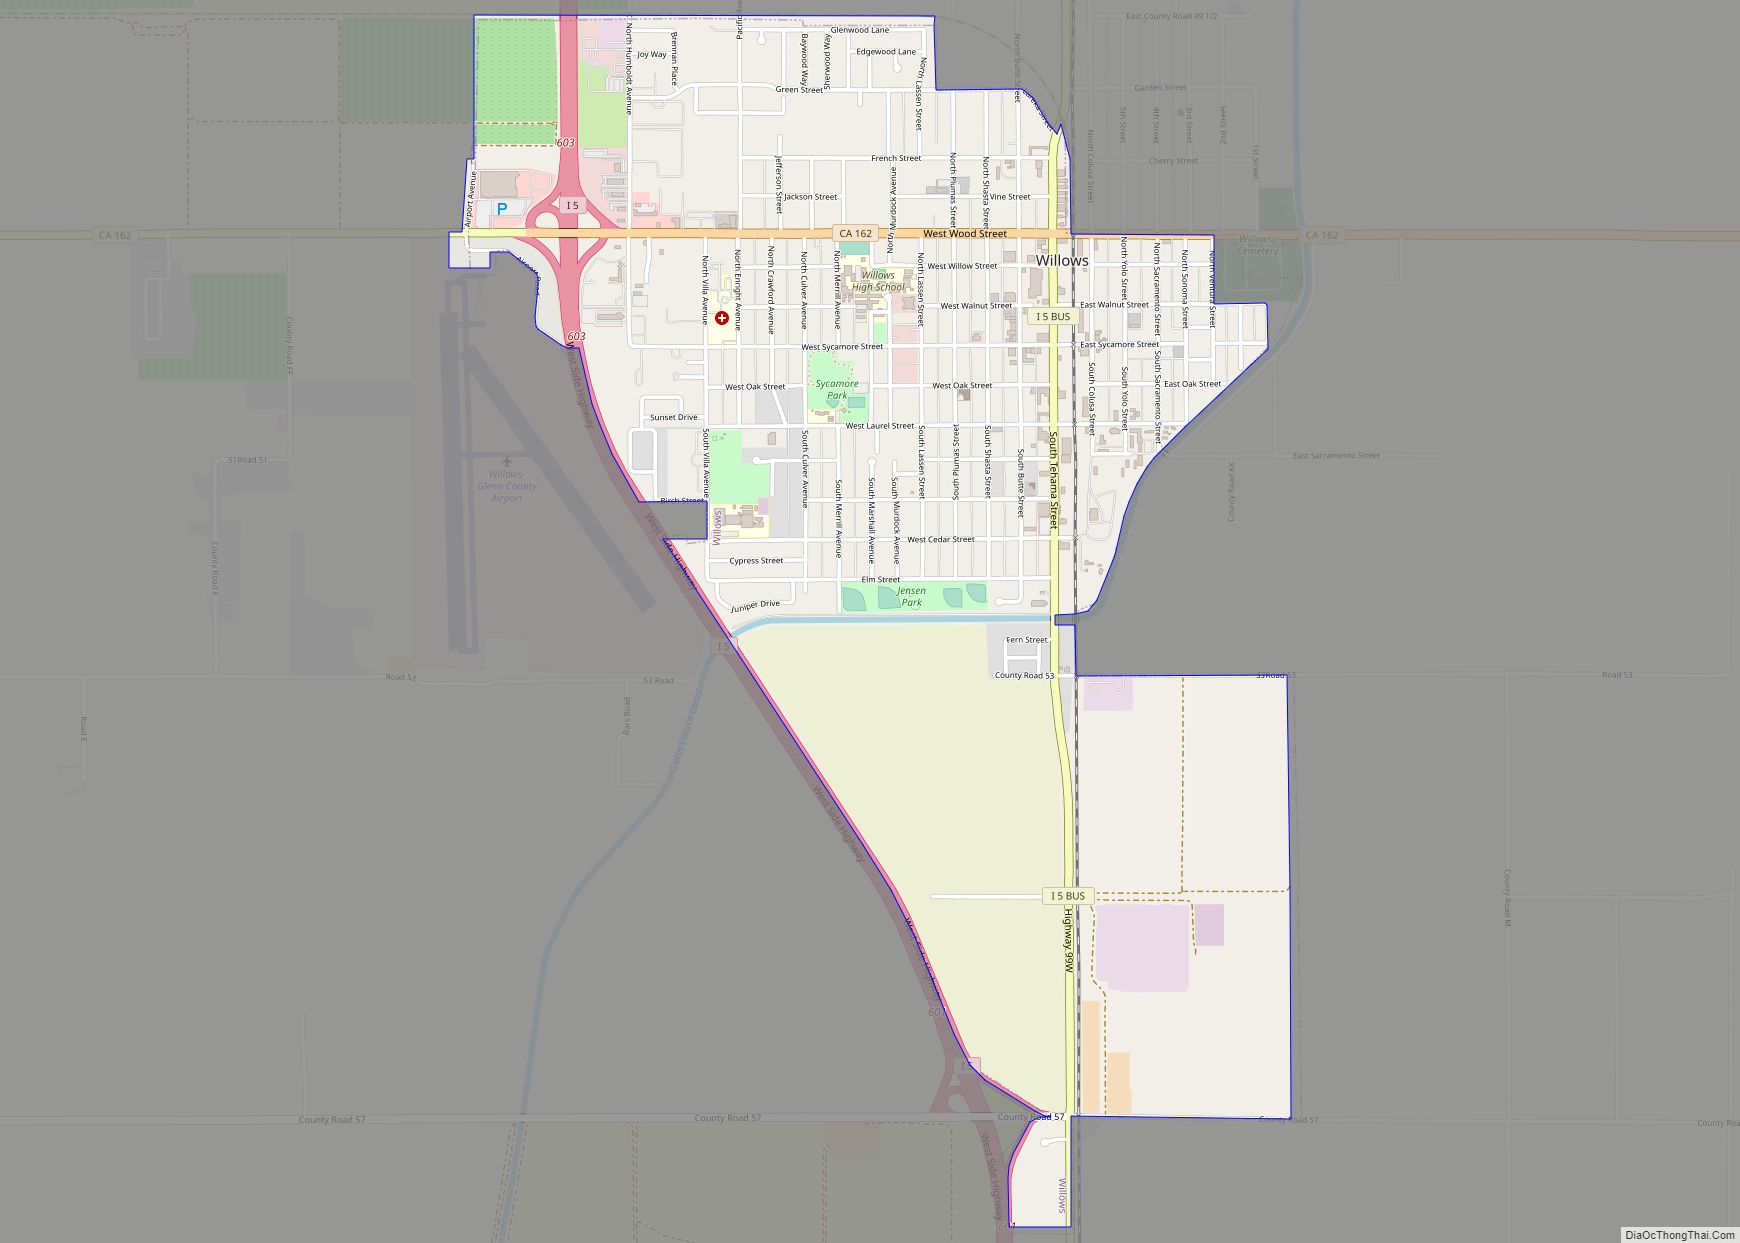 Map of Willows city